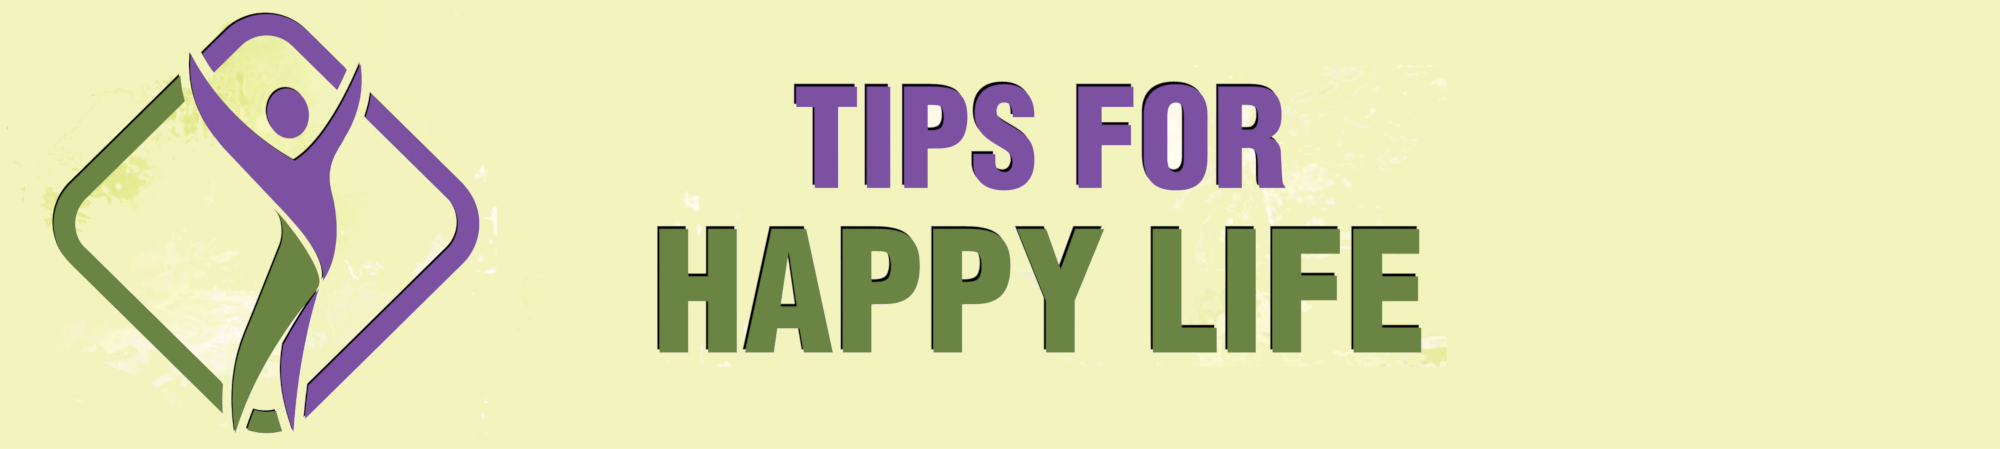 Tips for Happy Life